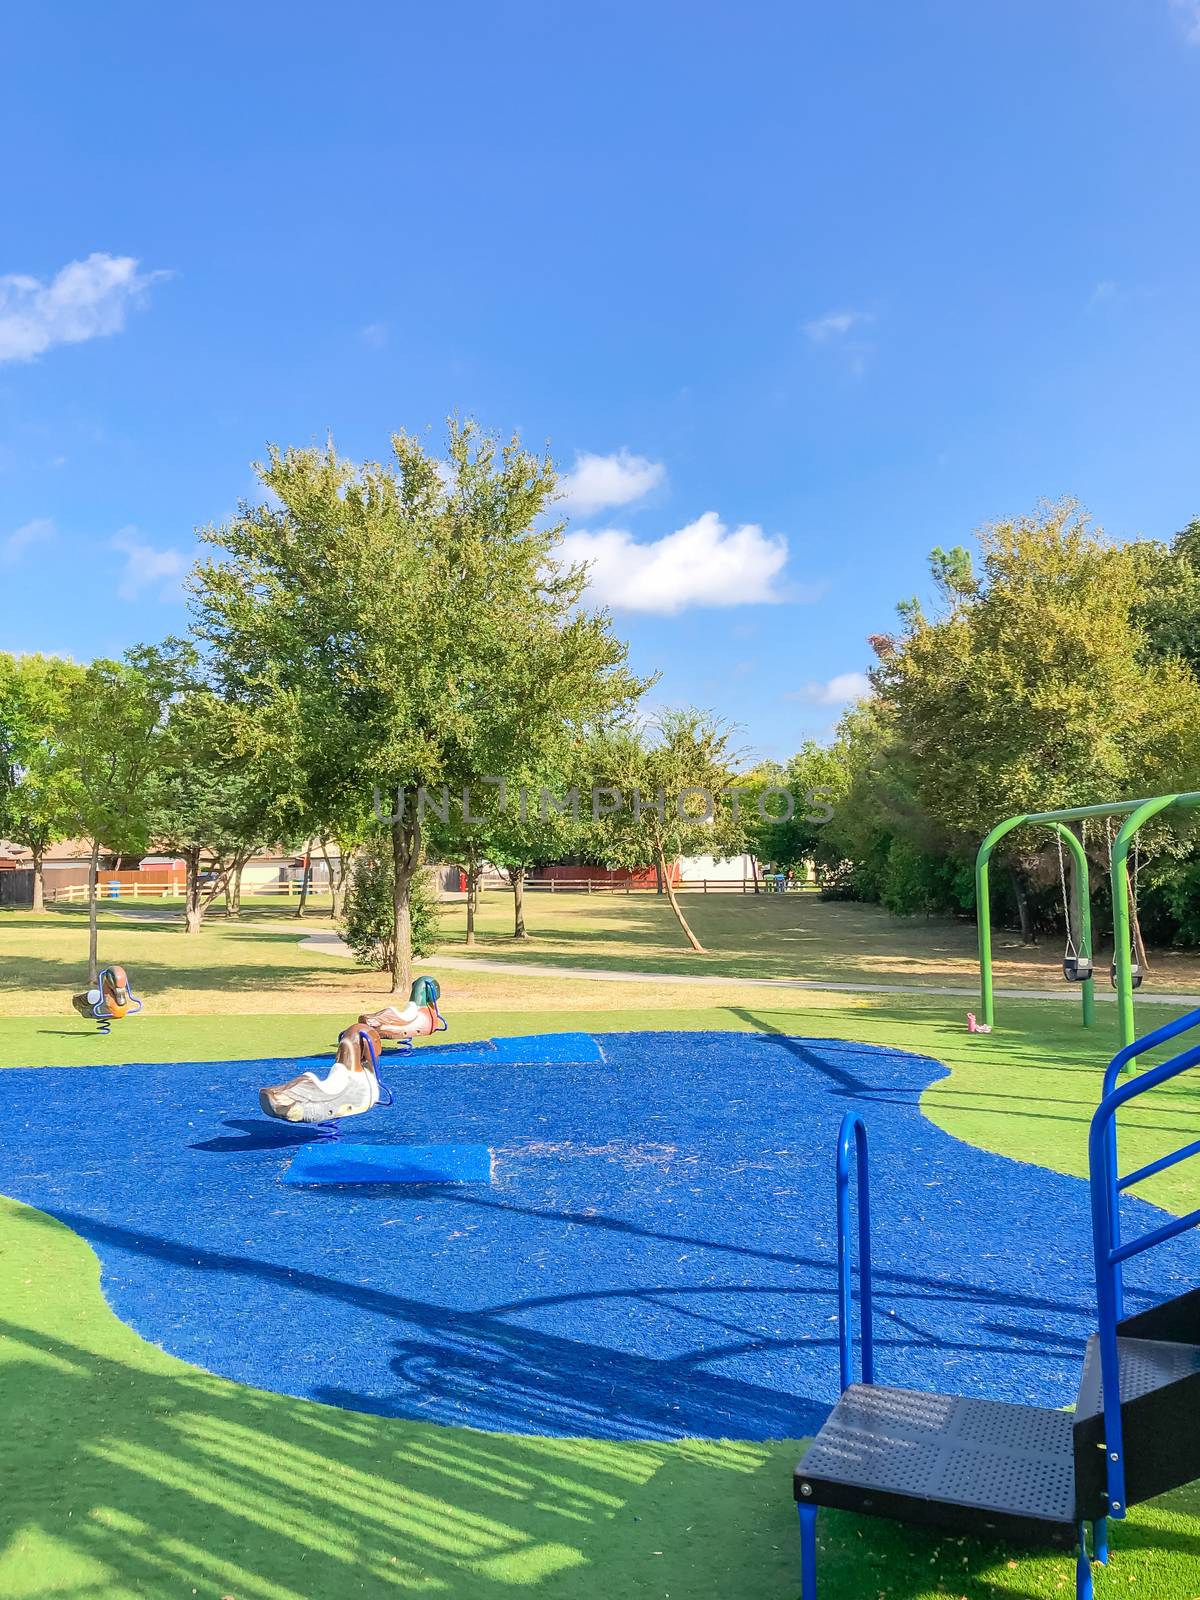 Neighborhood playground with artificial grass in Flower Mound, Texas, America. Suburban recreational facility surrounded by wooden fence